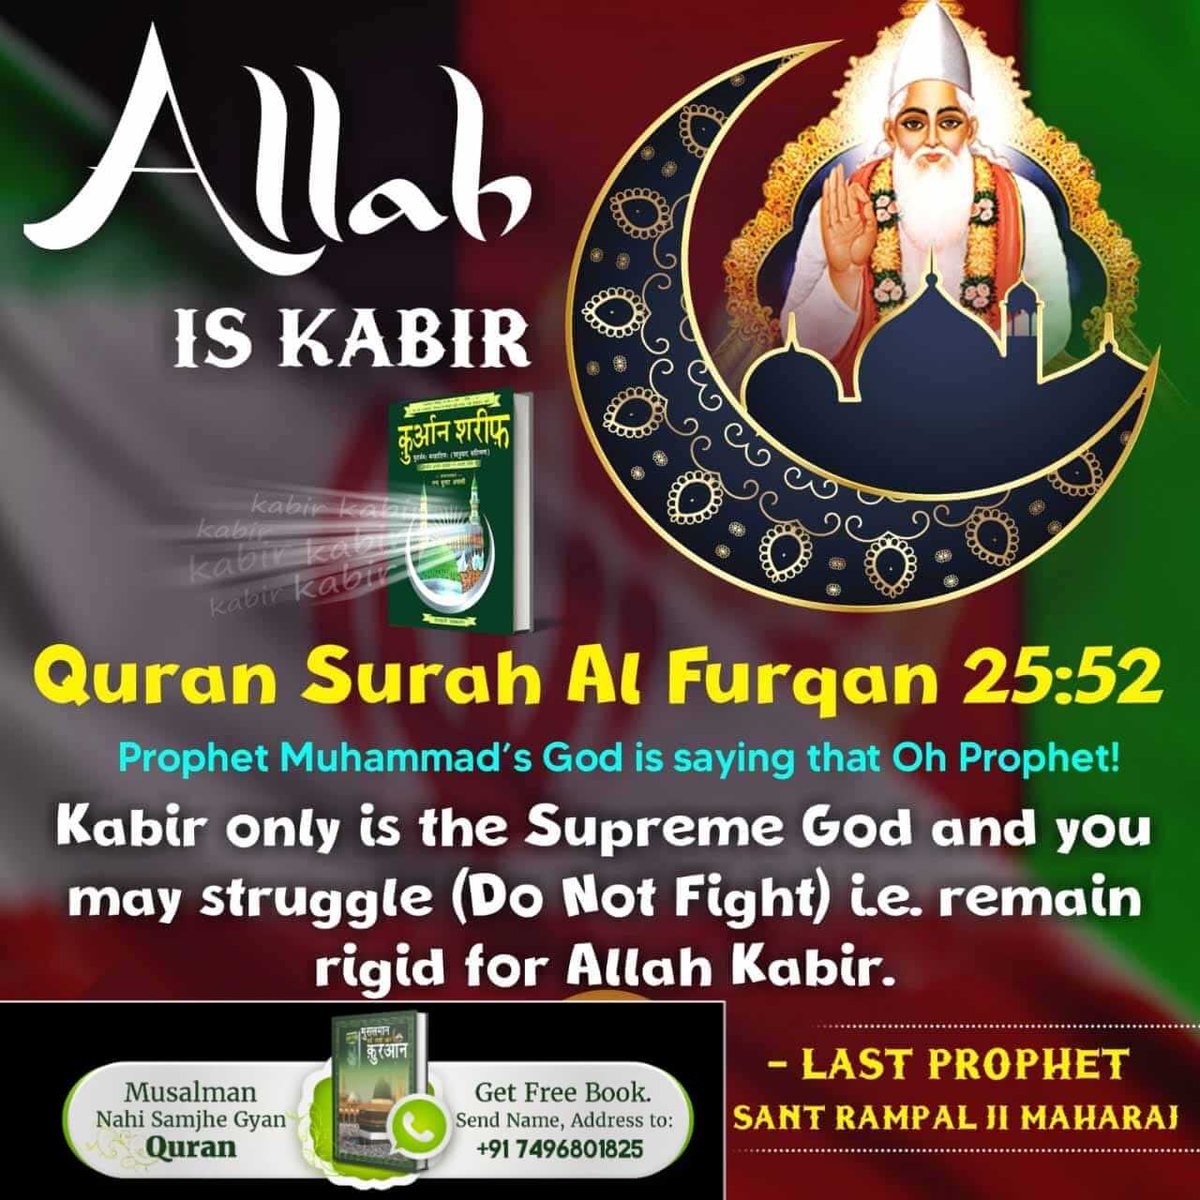 #GodMorningSaturday
#HiddenSecretsInQuran
The knowledge giver of Quran Shariff says,  He is Kabir Allah, who moved two rivers, water of one is sweet, to quench thirst, and of other is salty-bitter, and made strong blockade, stoppage inside both.
Allah Kabir